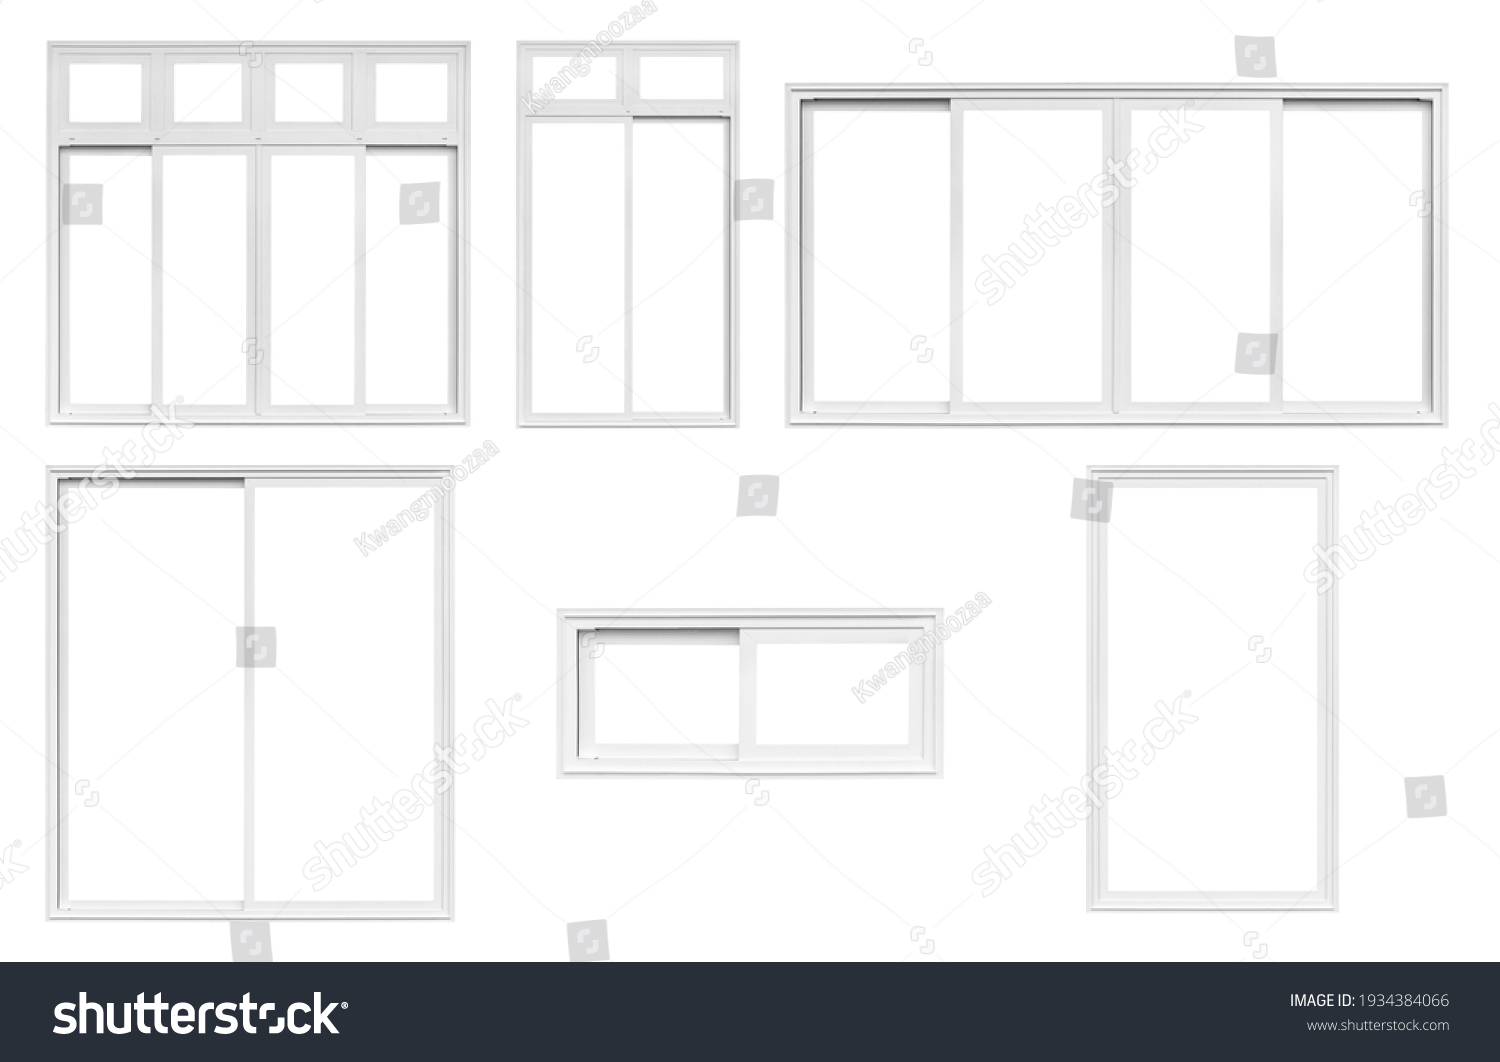 Real modern house window frame set collection isolated on white background with clipping path #1934384066